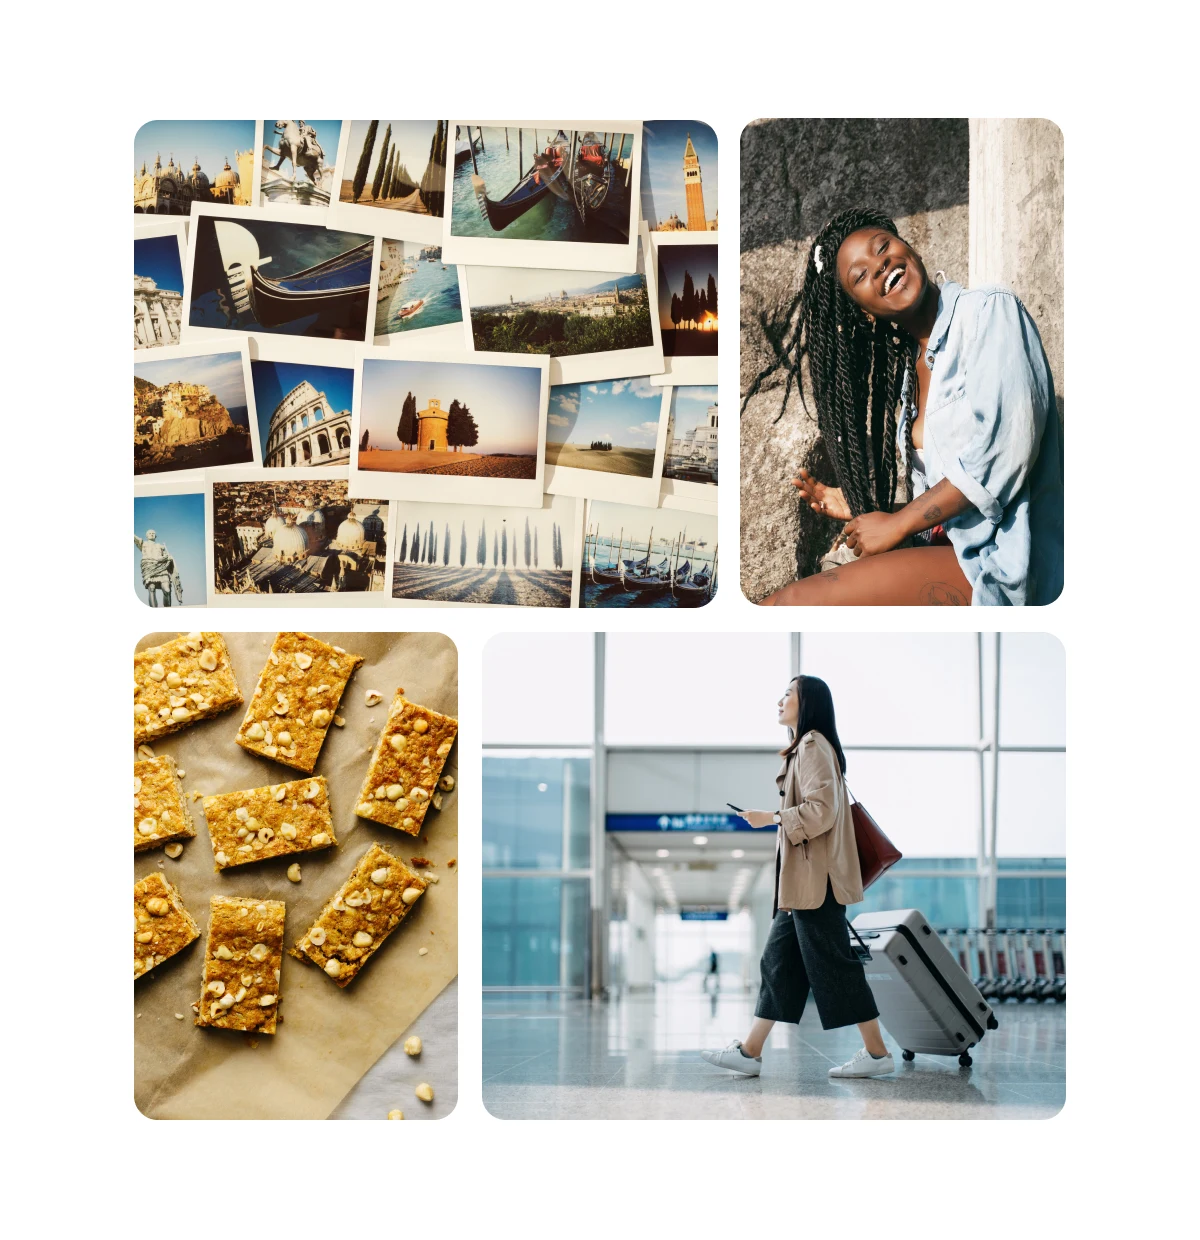  Pin grid featuring stack of travel Polaroids, woman smiling in the sun, homemade granola bars, woman walking through airport.